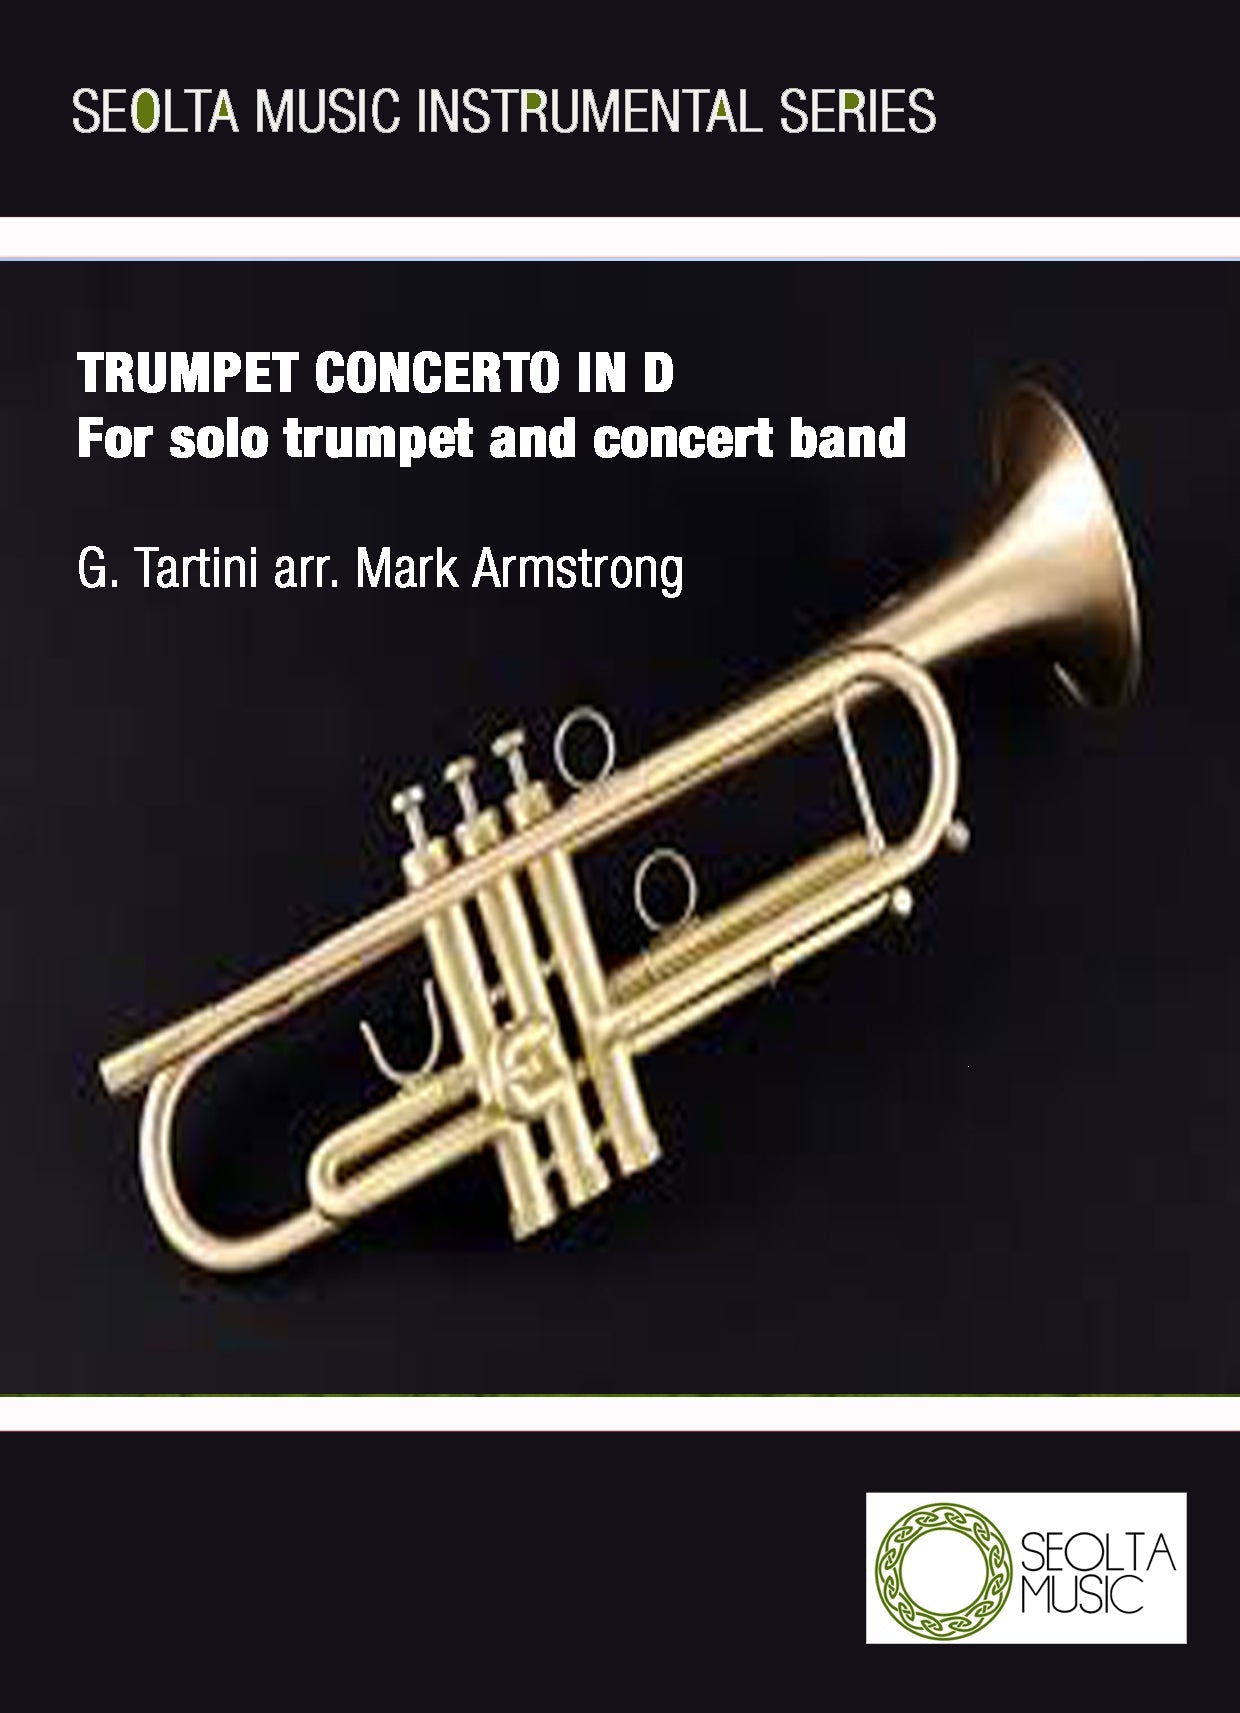 trumpet-concerto-in-d-g-tartini-arranged-for-trumpet-and-concert-band